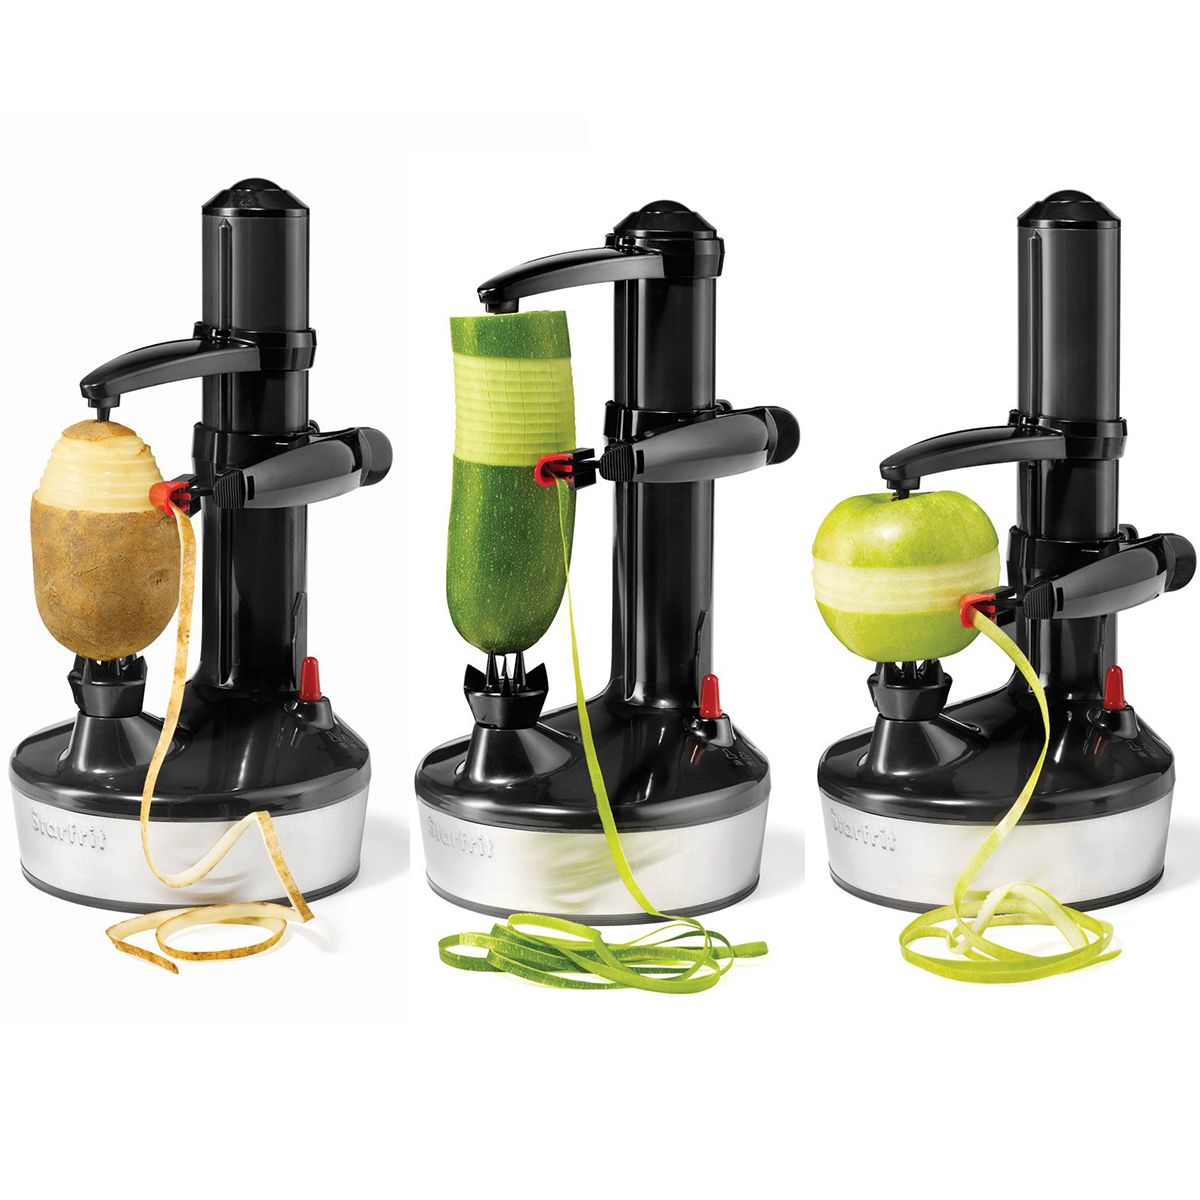 Ltrototea Electric Vegetable Peelers, Electric Rechargeable